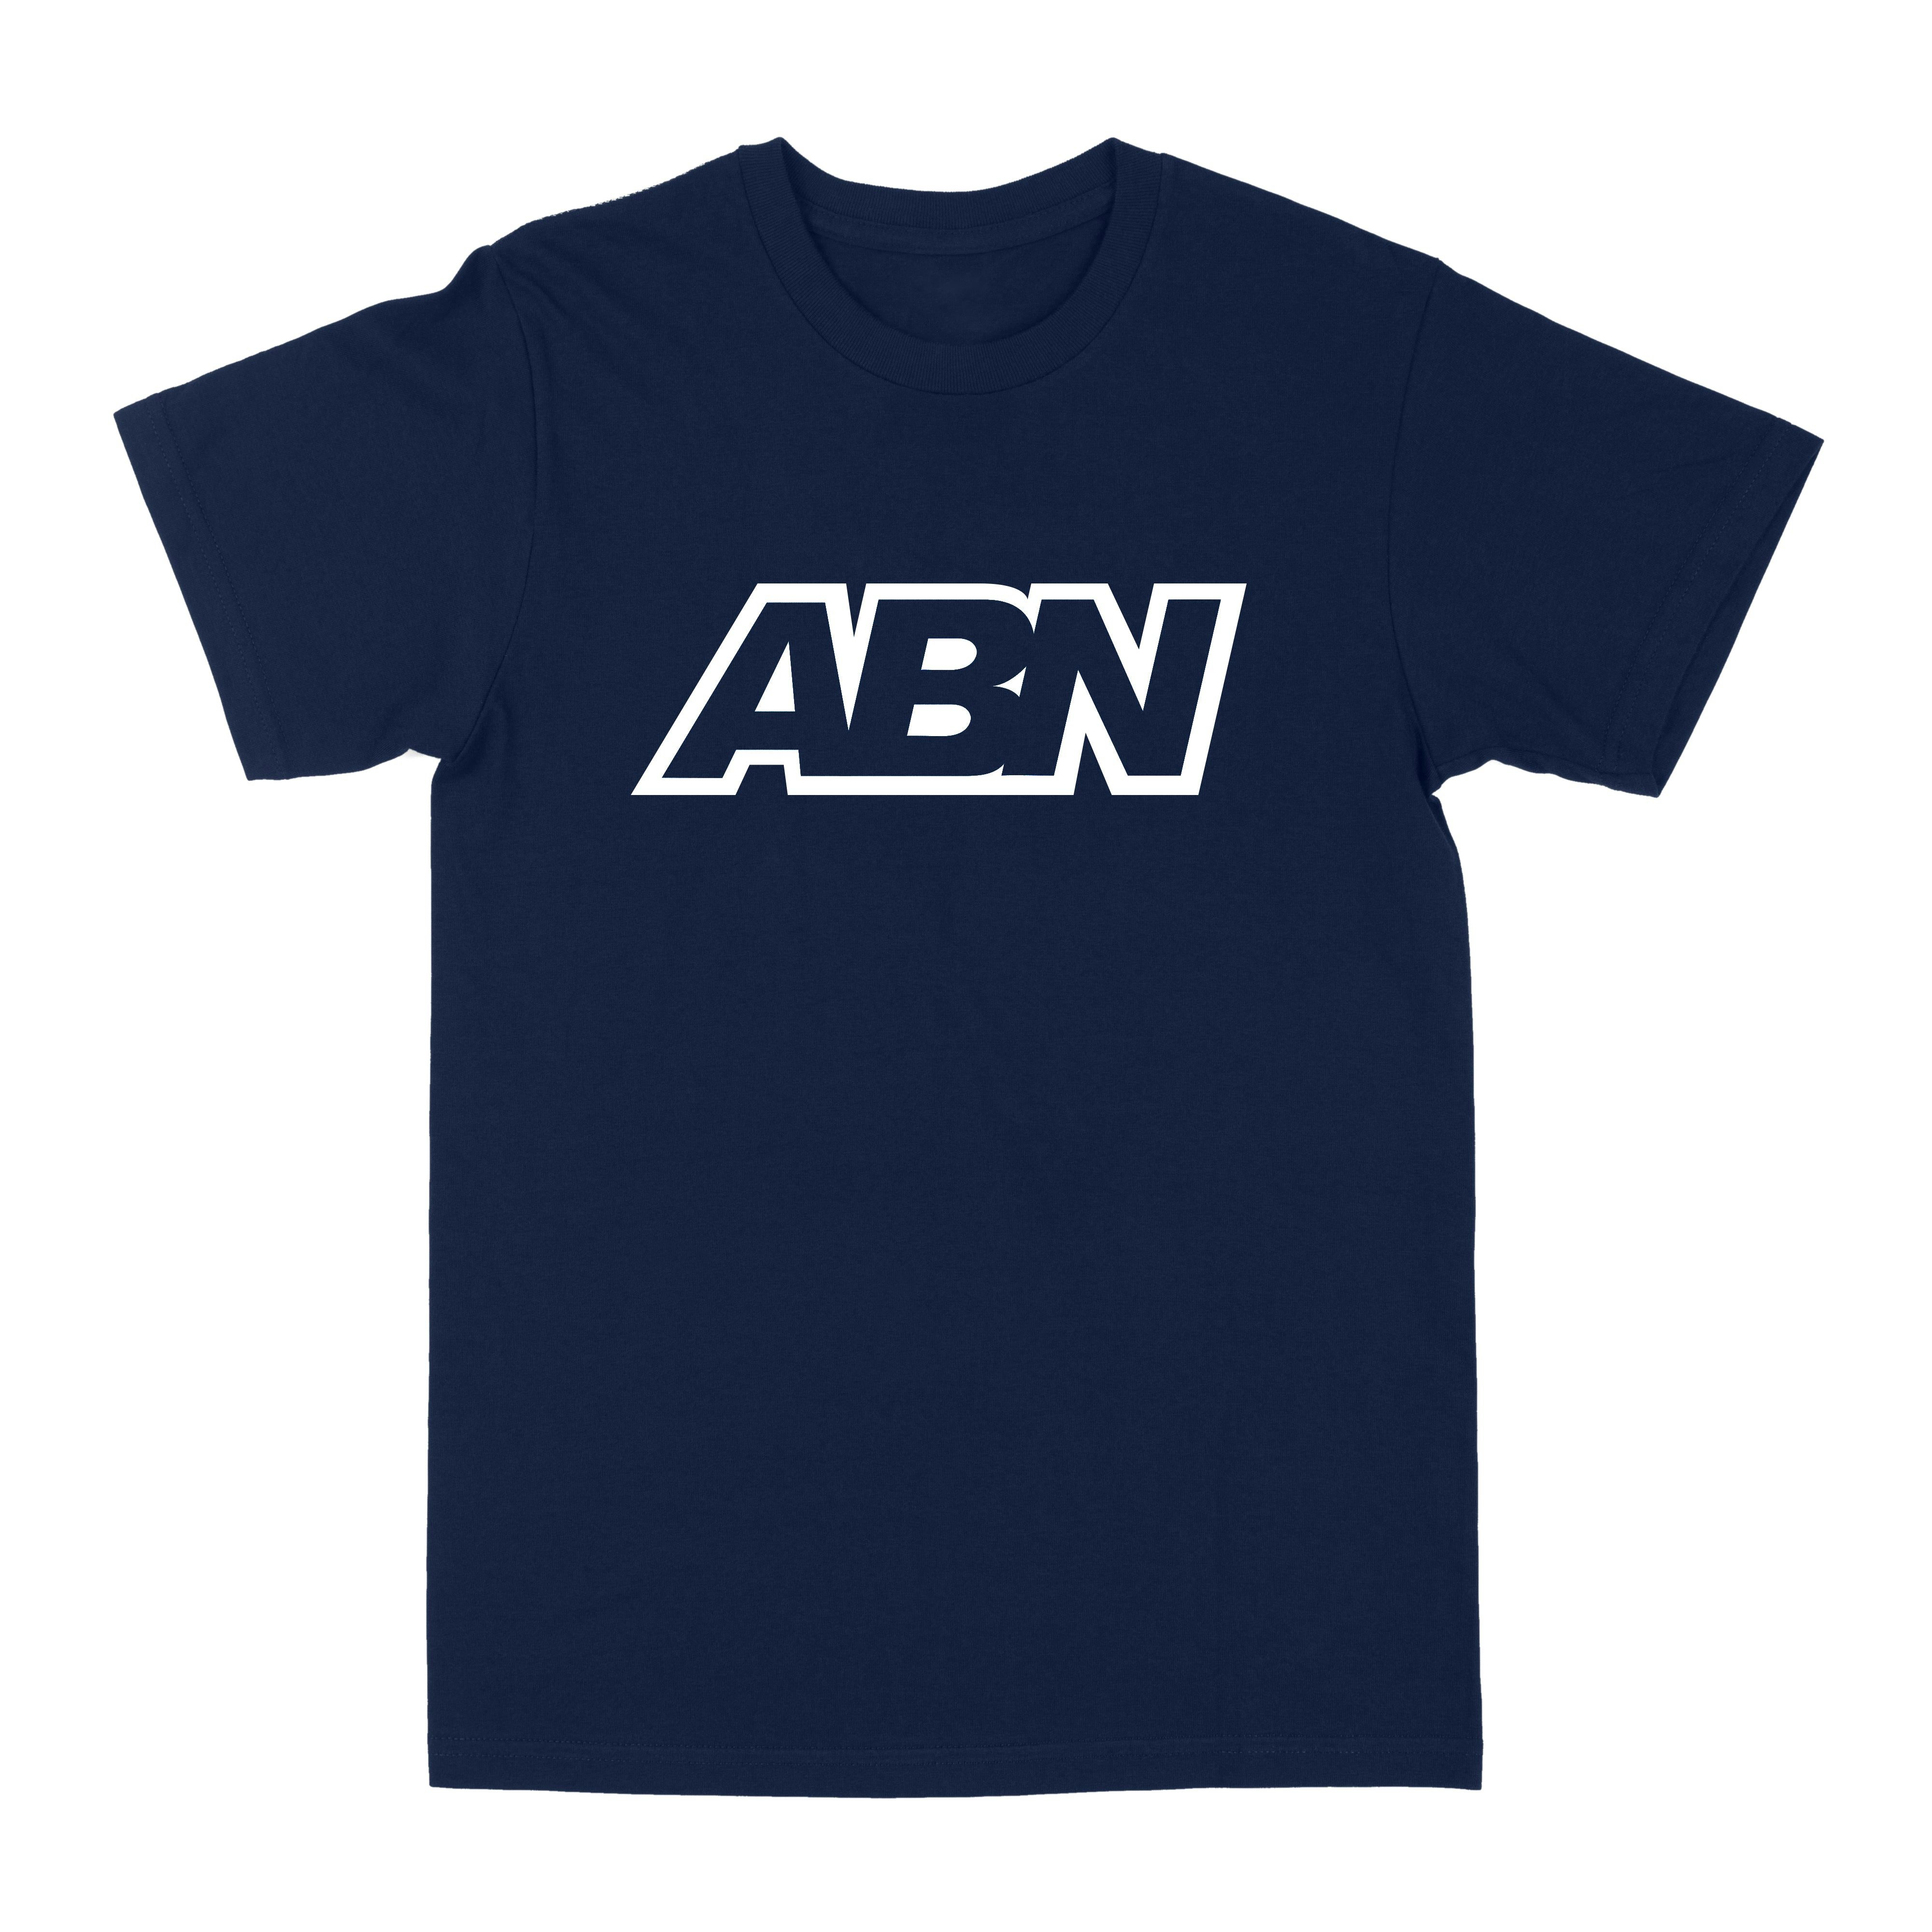 ABN Cleanroom Technology - LabForRent